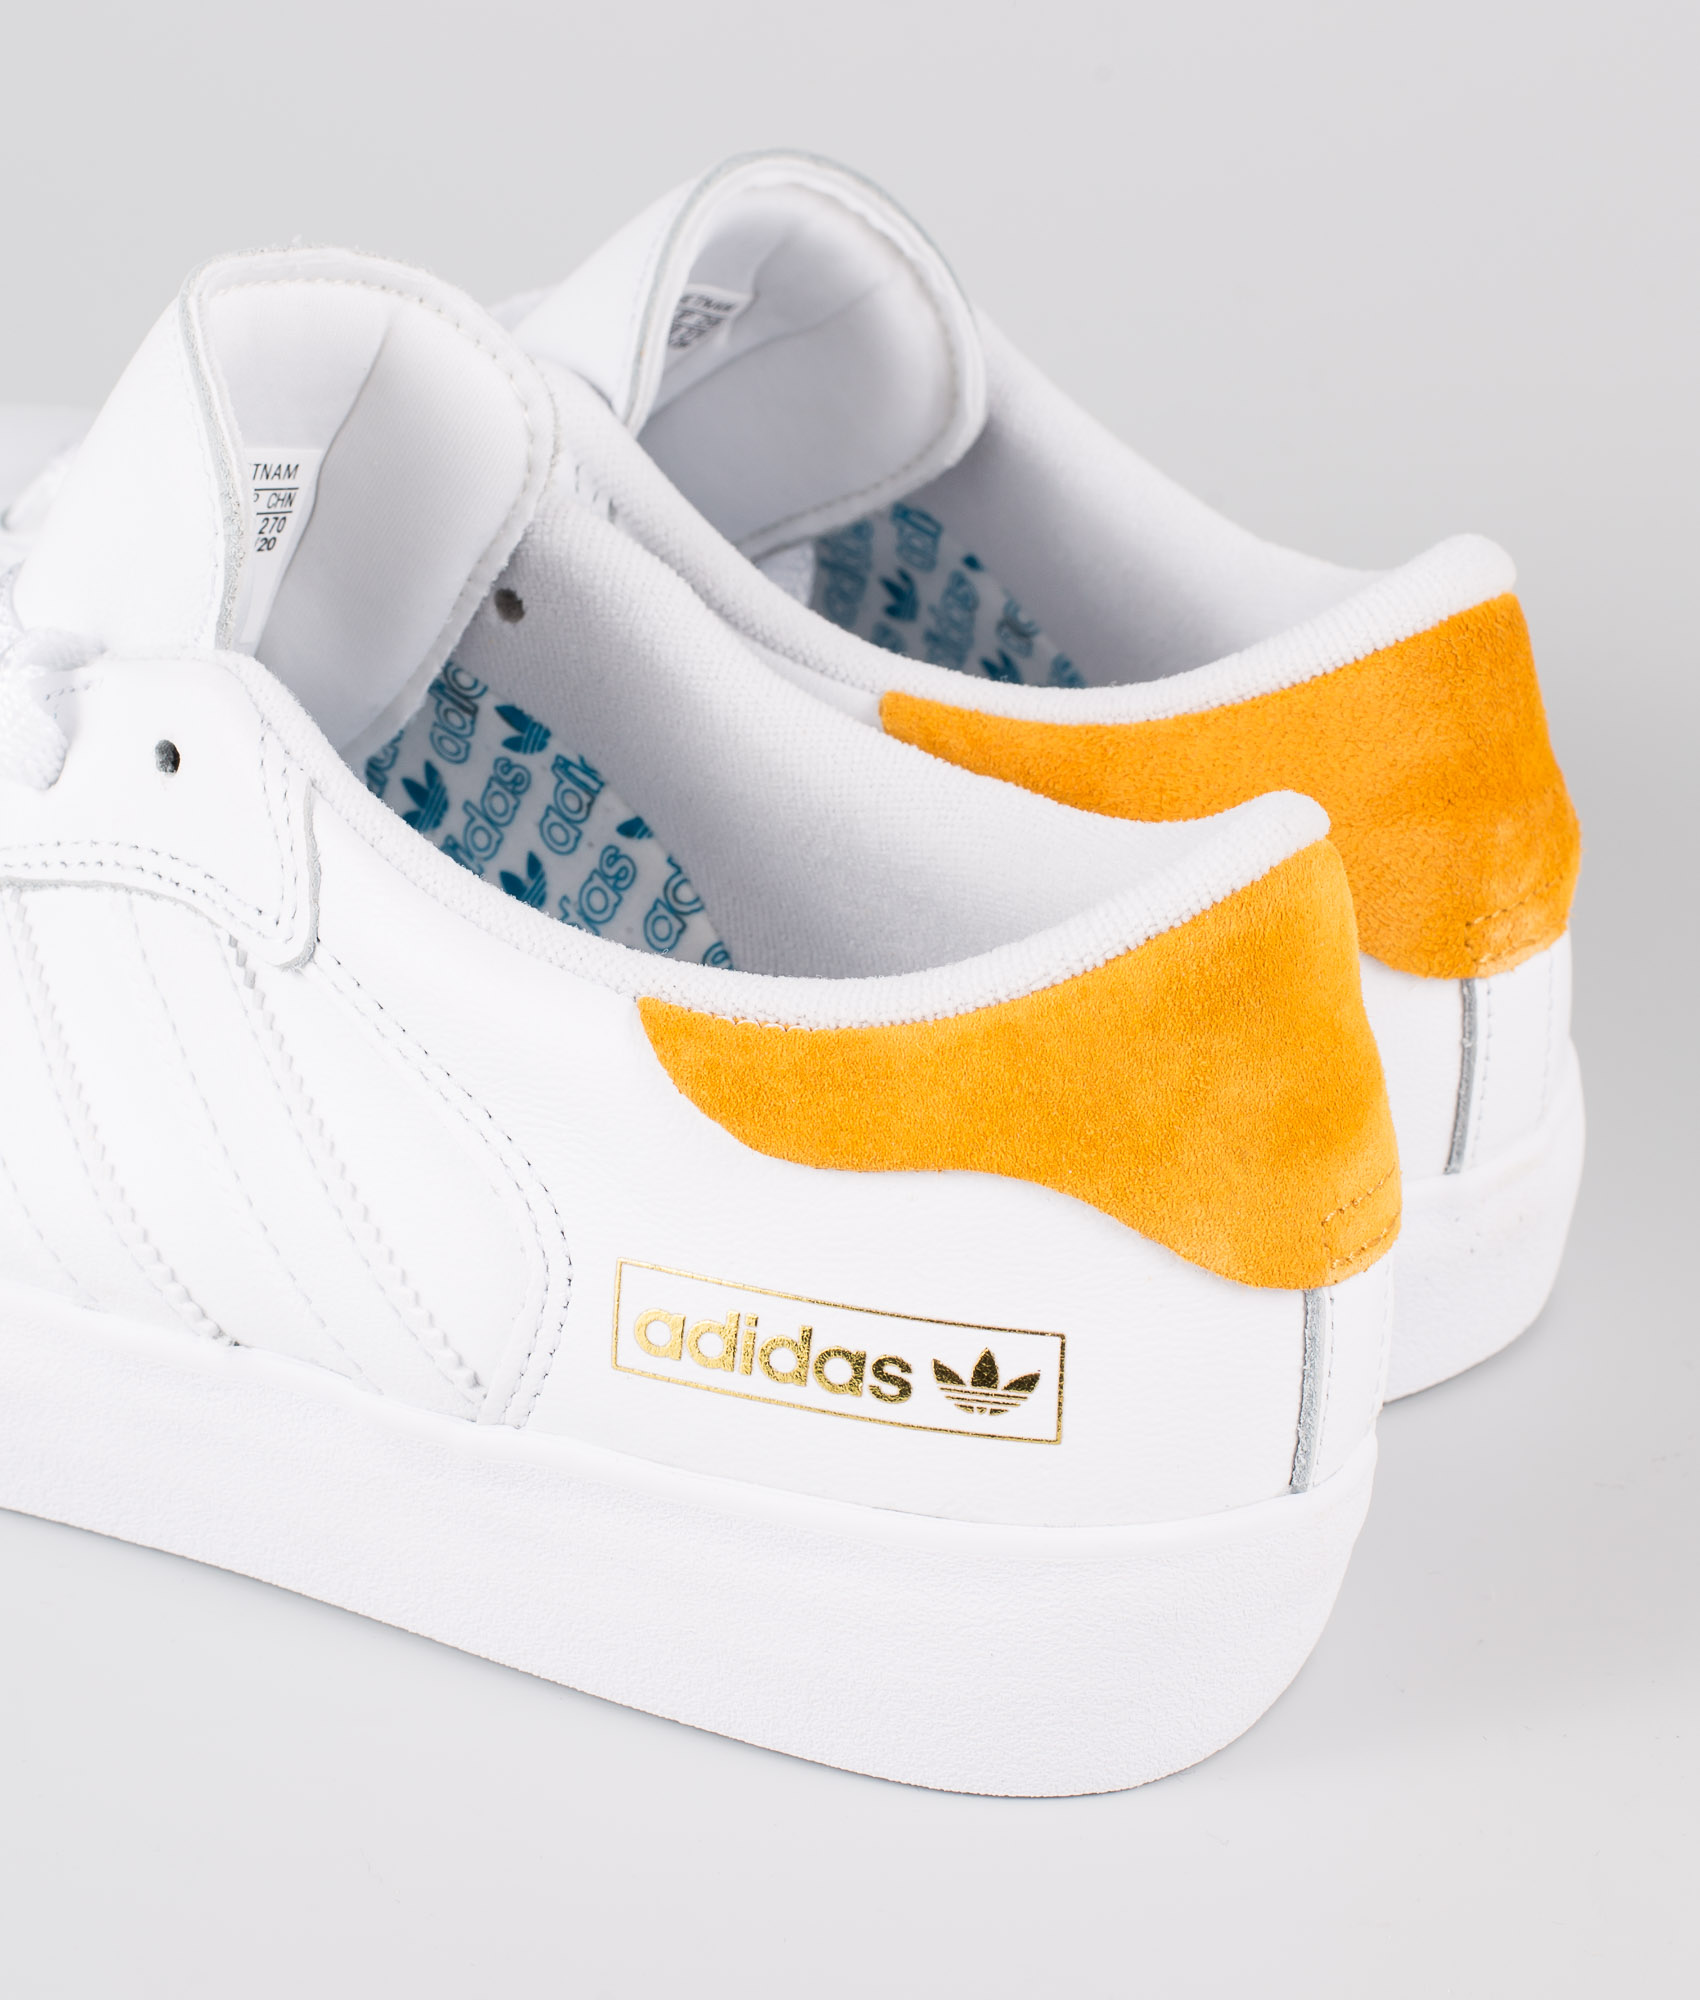 white and yellow adidas shoes